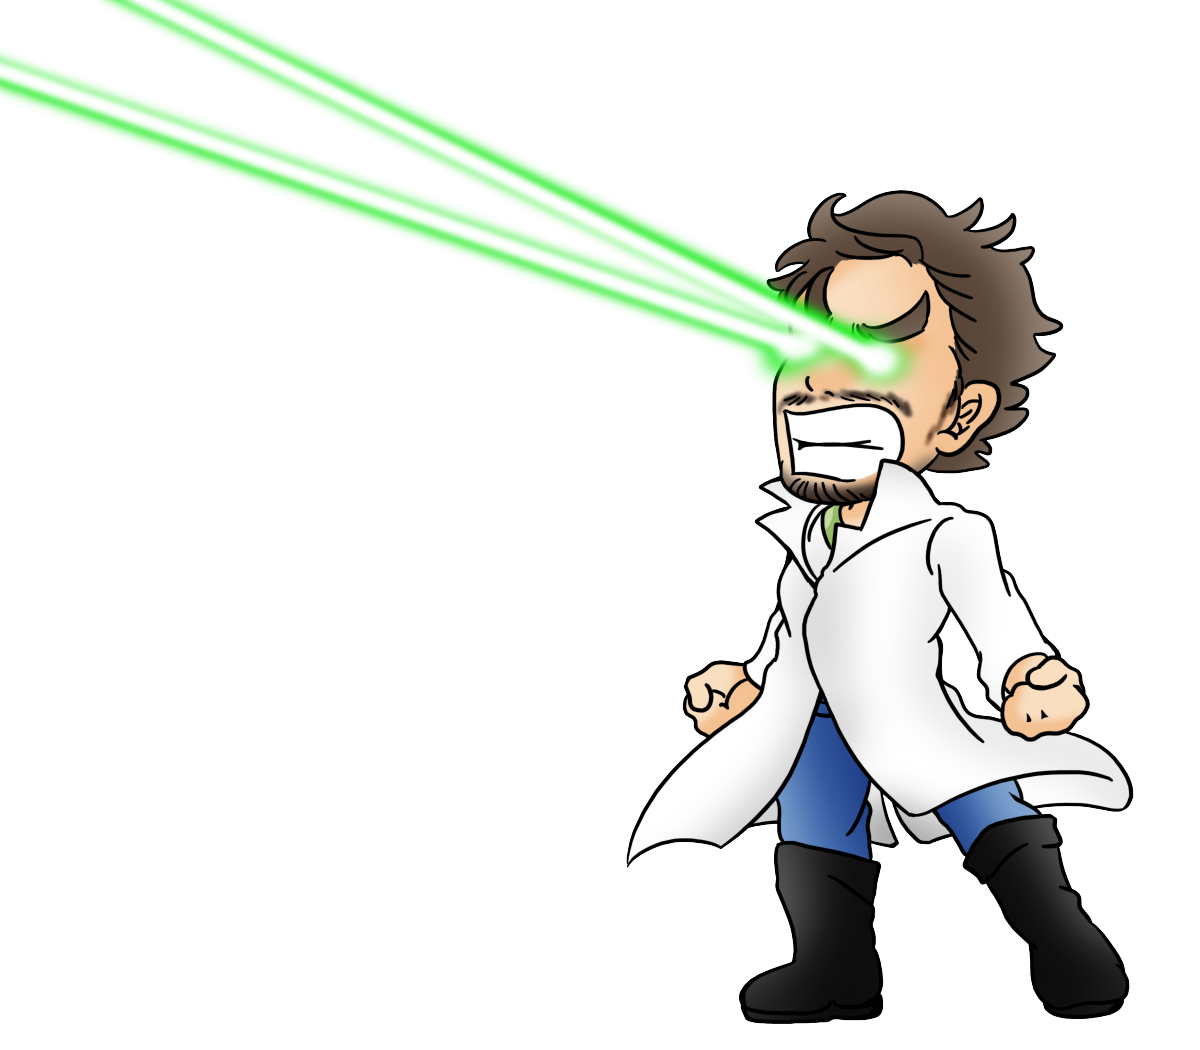 Gant shooting a laser from his eyes